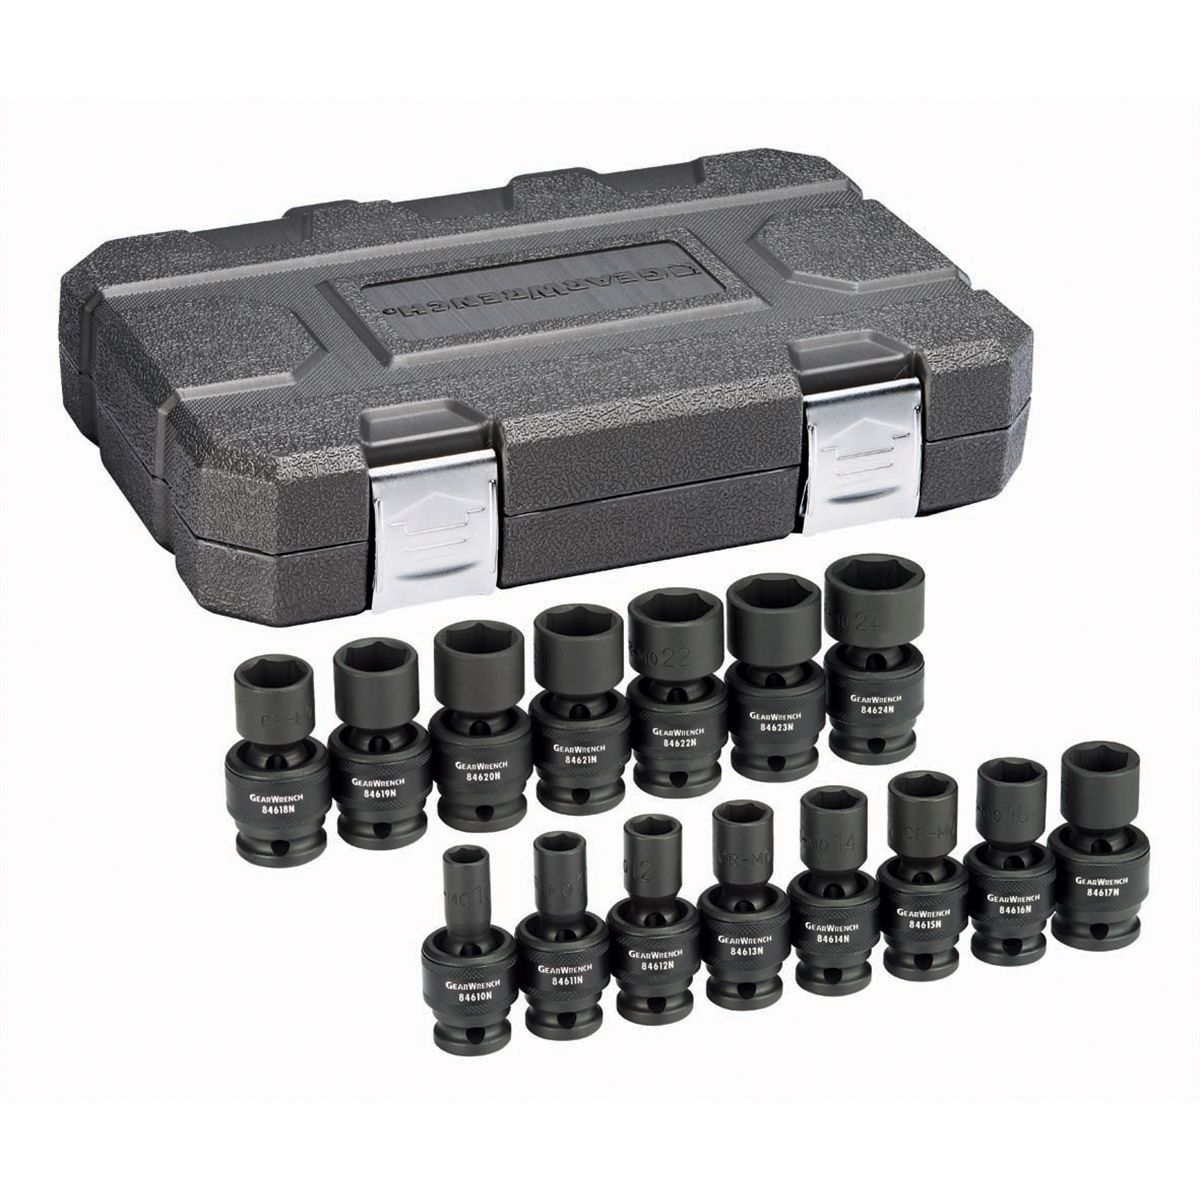 15 Pc. 1/2" Drive 6 point